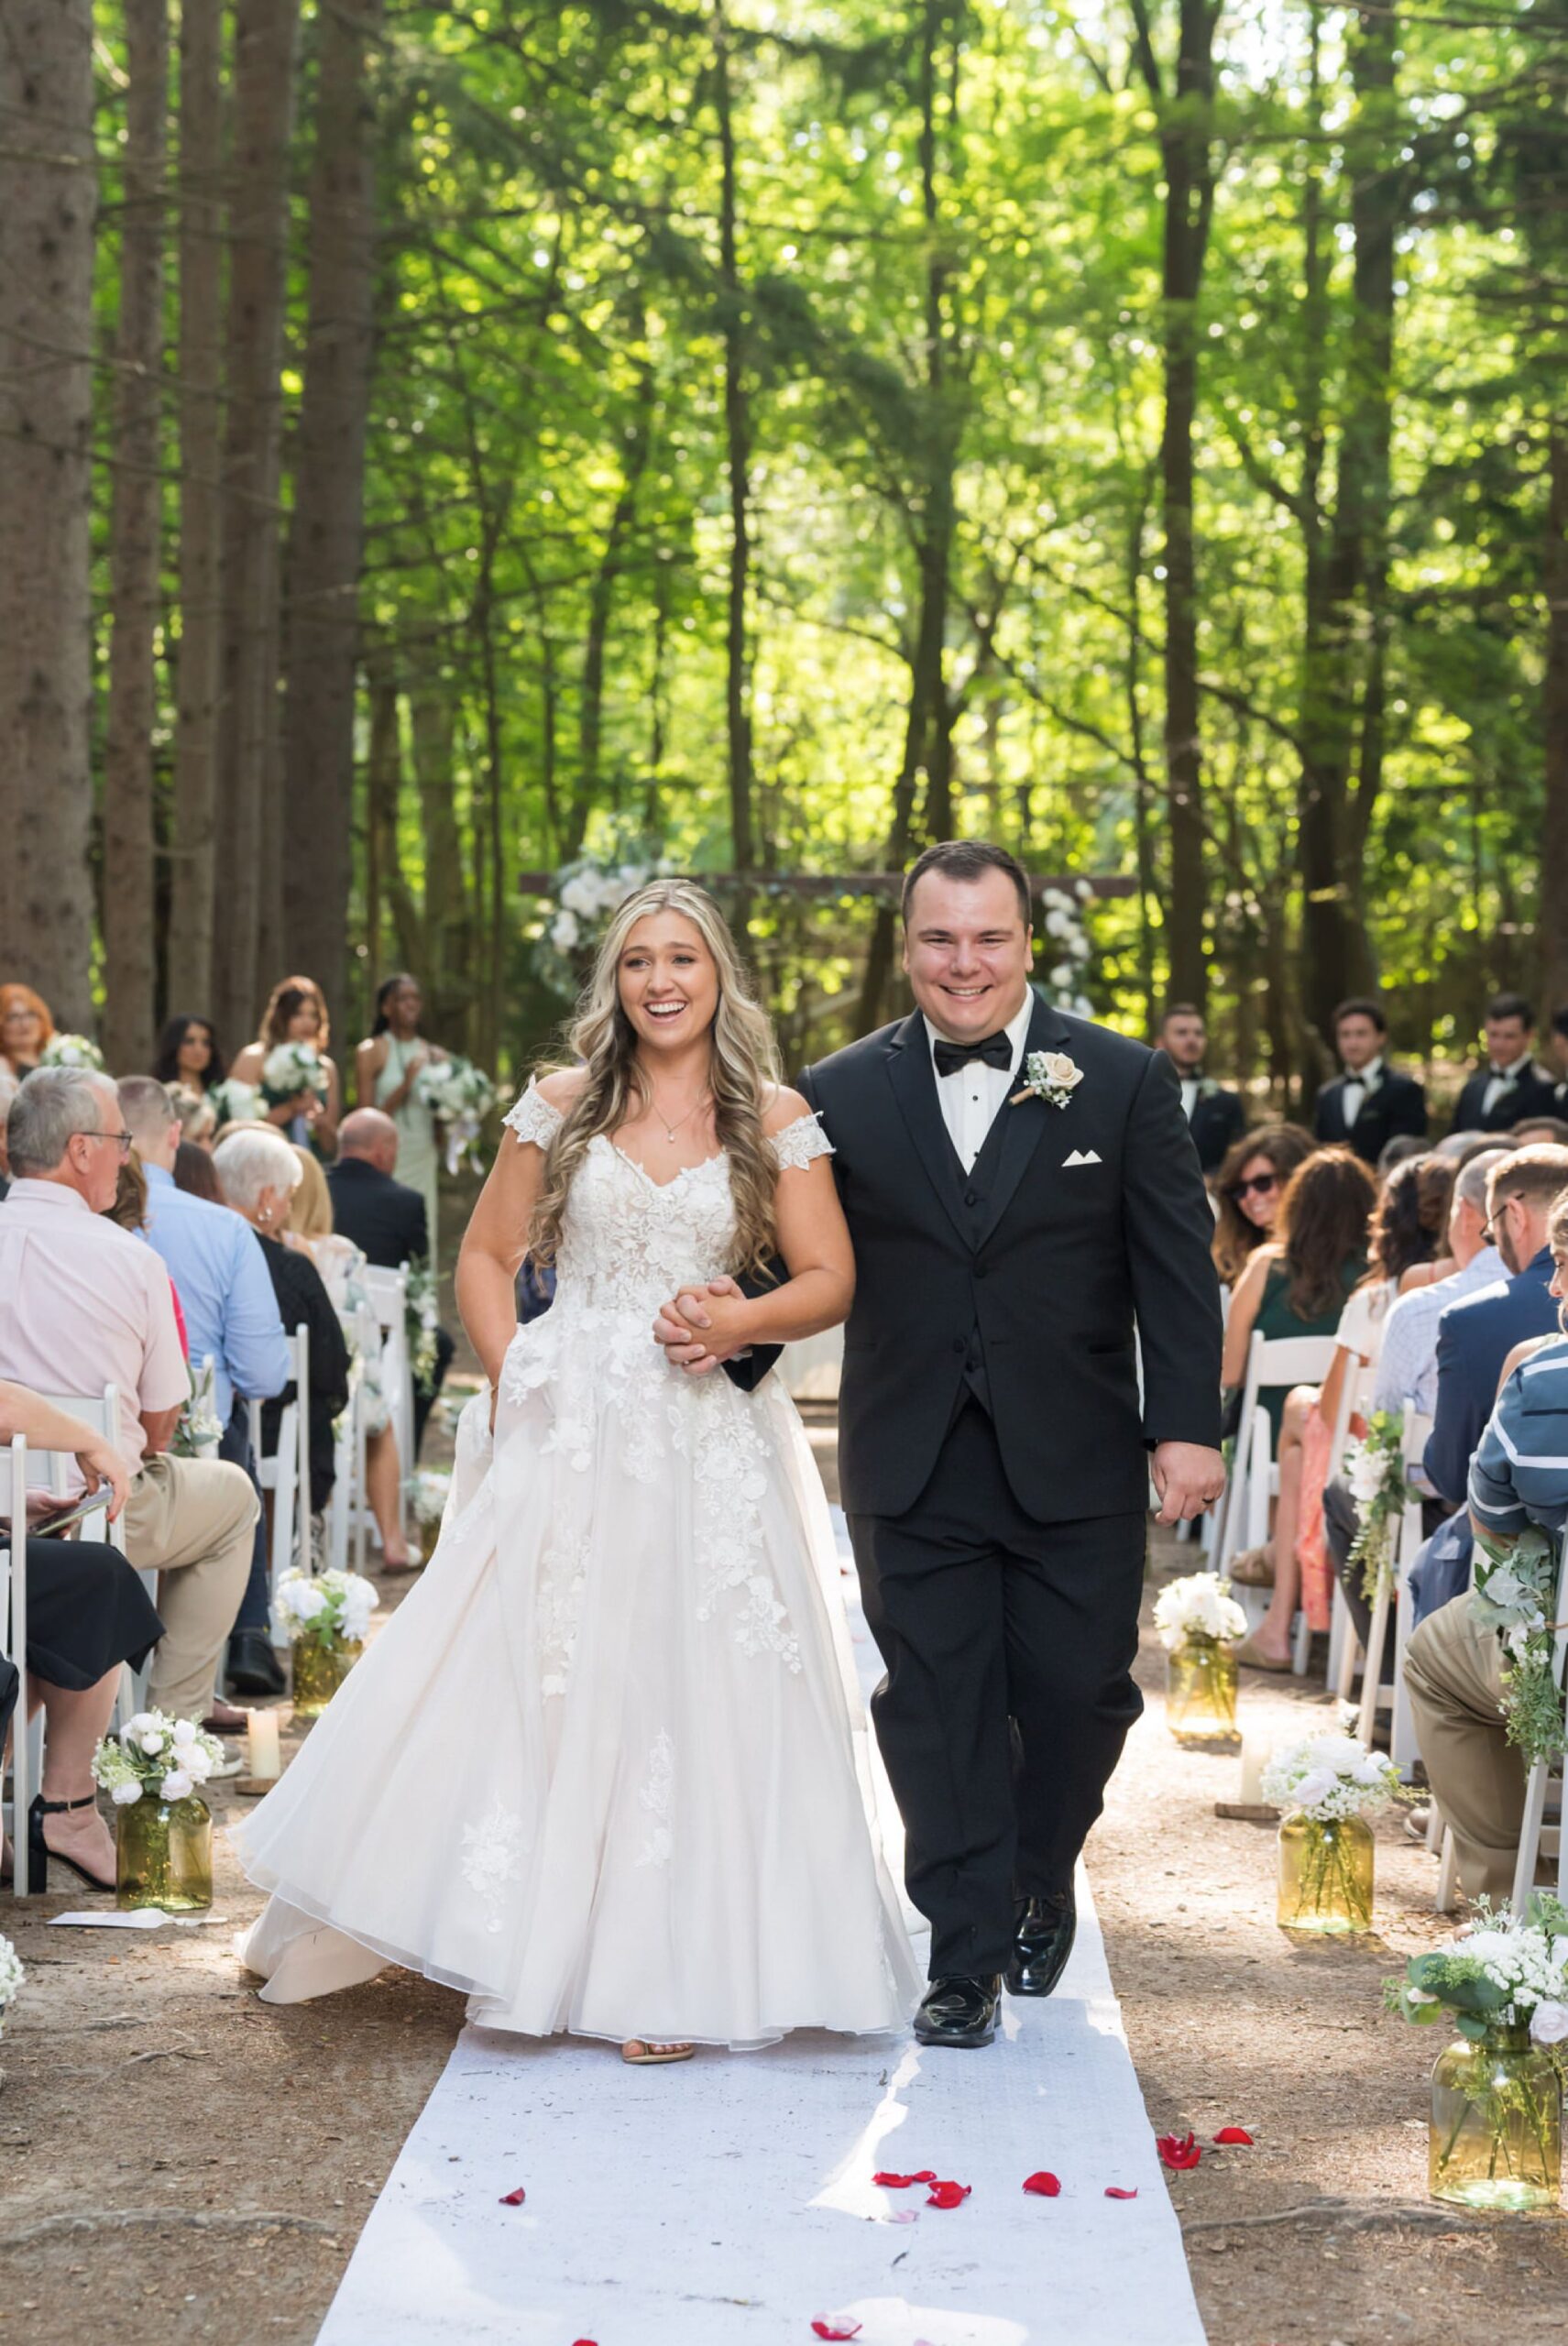 The bride and groom smile as they walk down the aisle at their Stony Creek wedding in The Pines.  